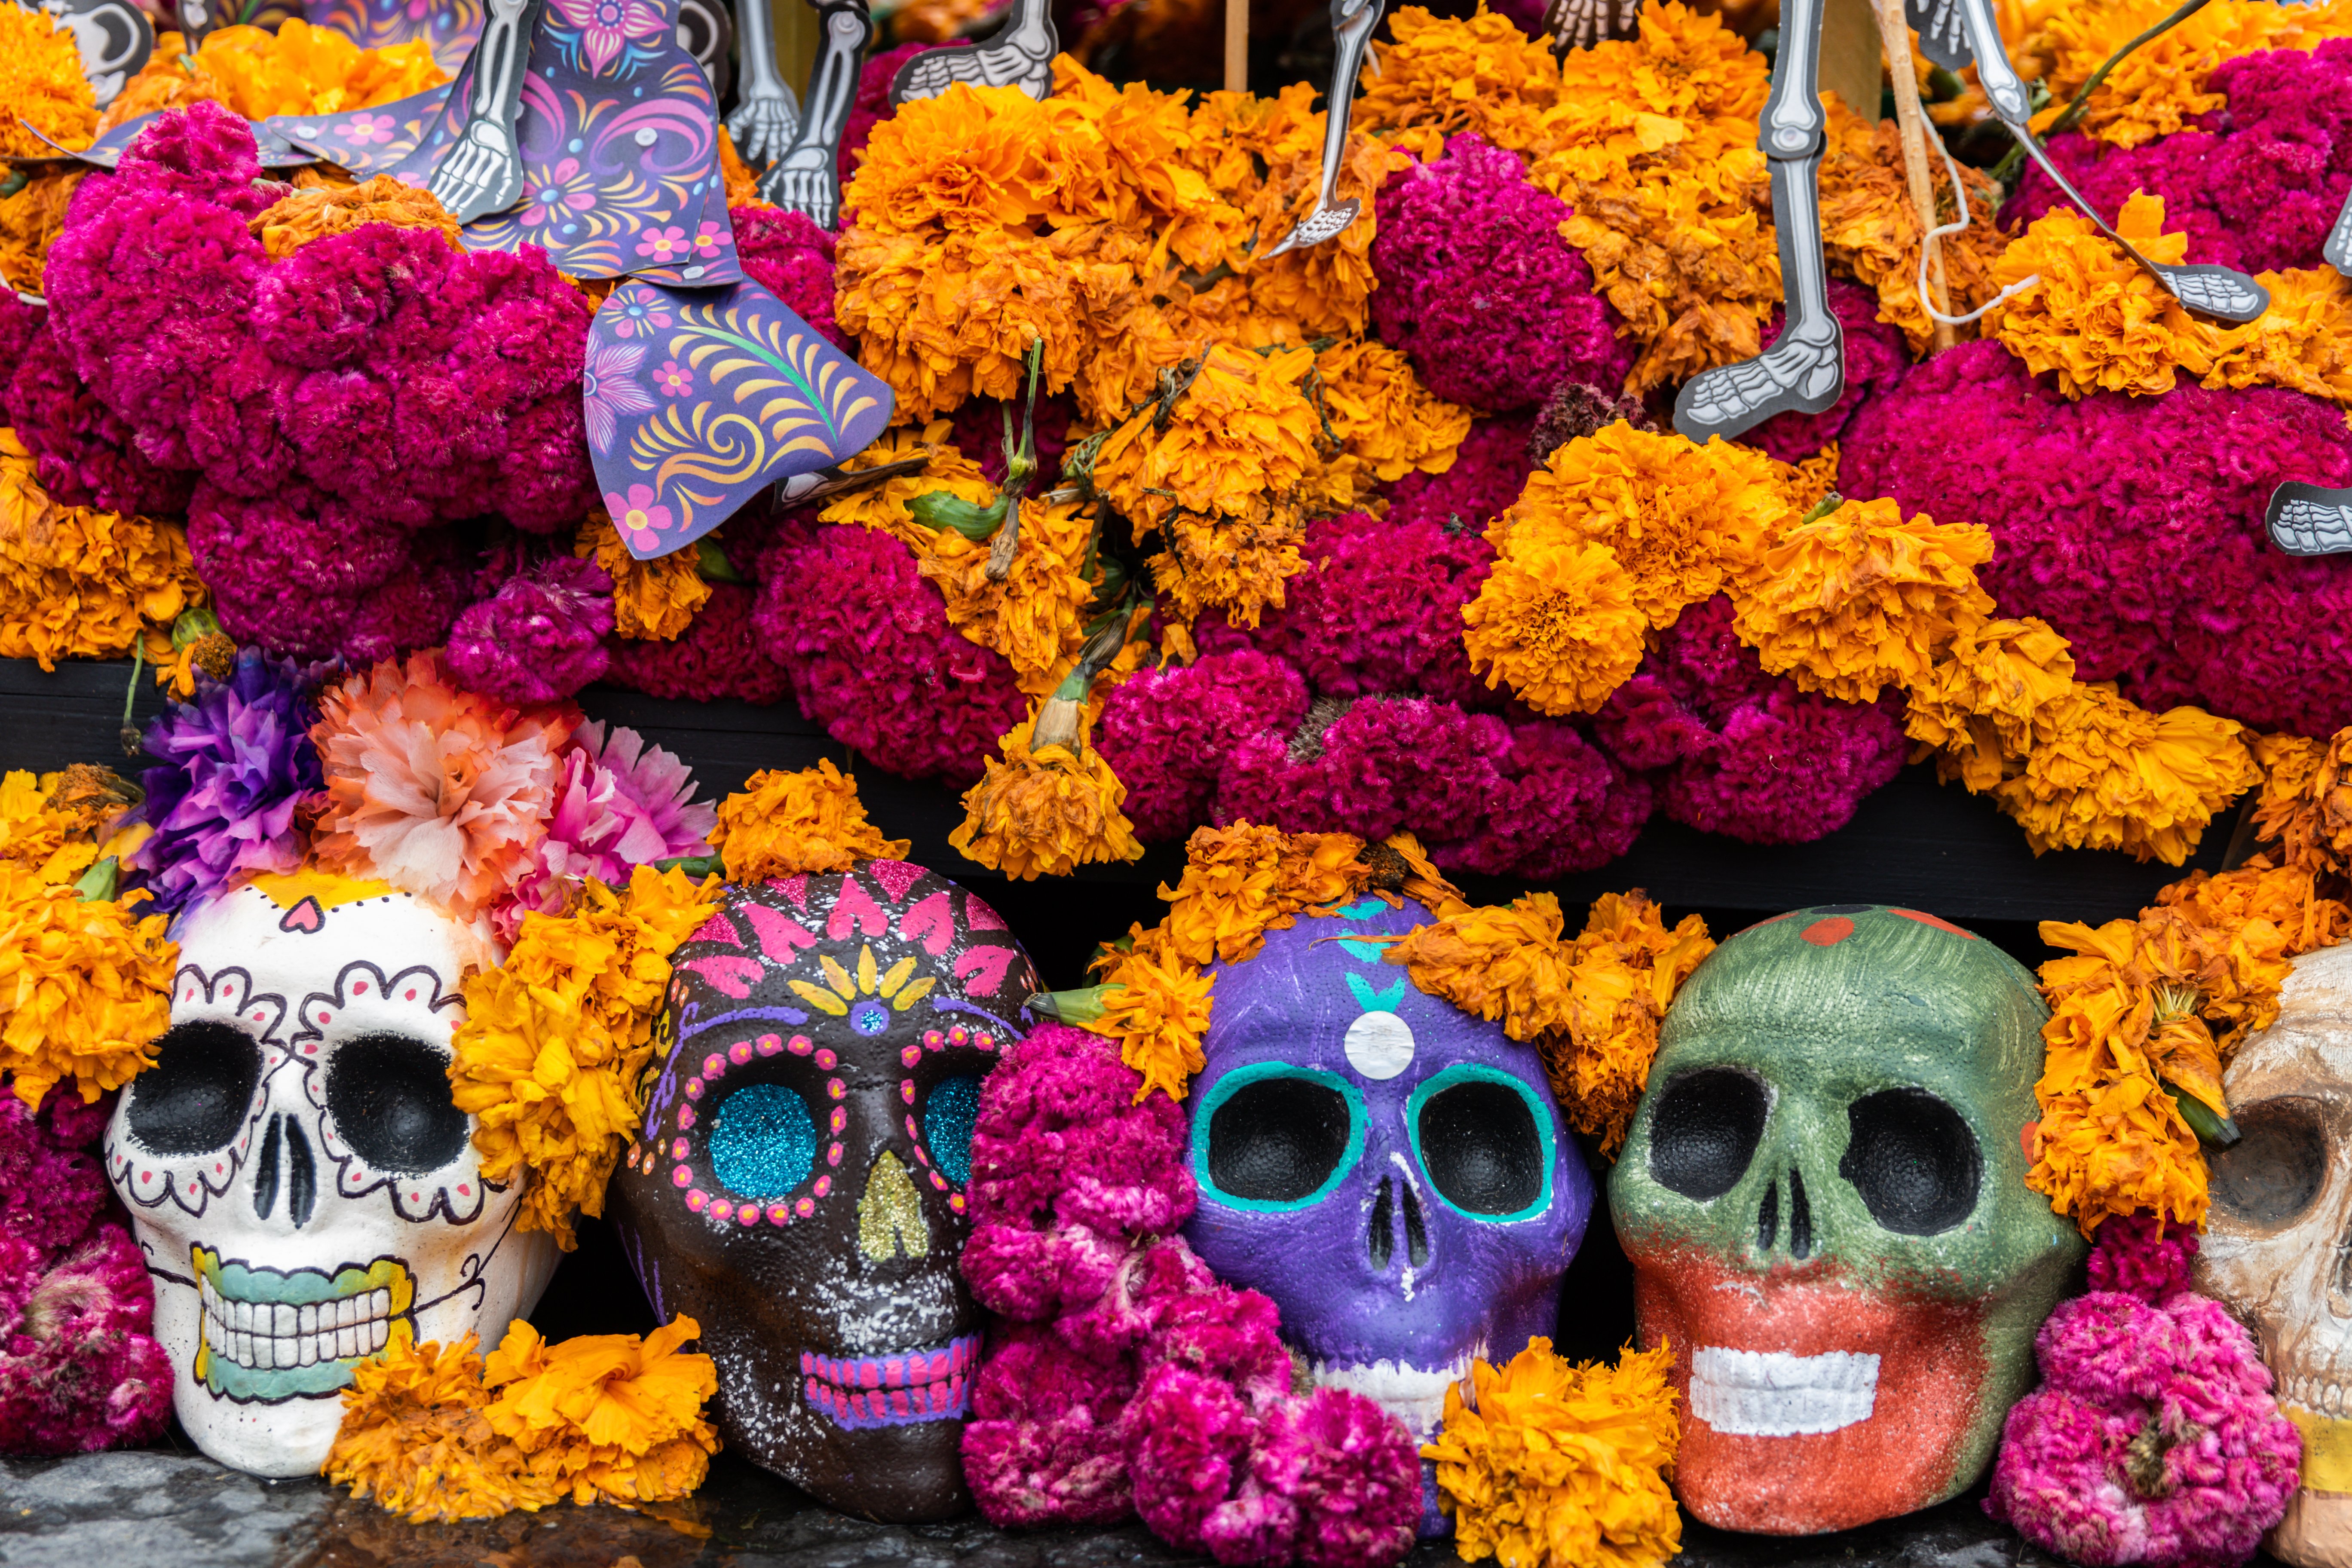 Marigold flowers and skulls in Day of the Dead celebrations altar decorations in Mexico City. | Source: Getty Images